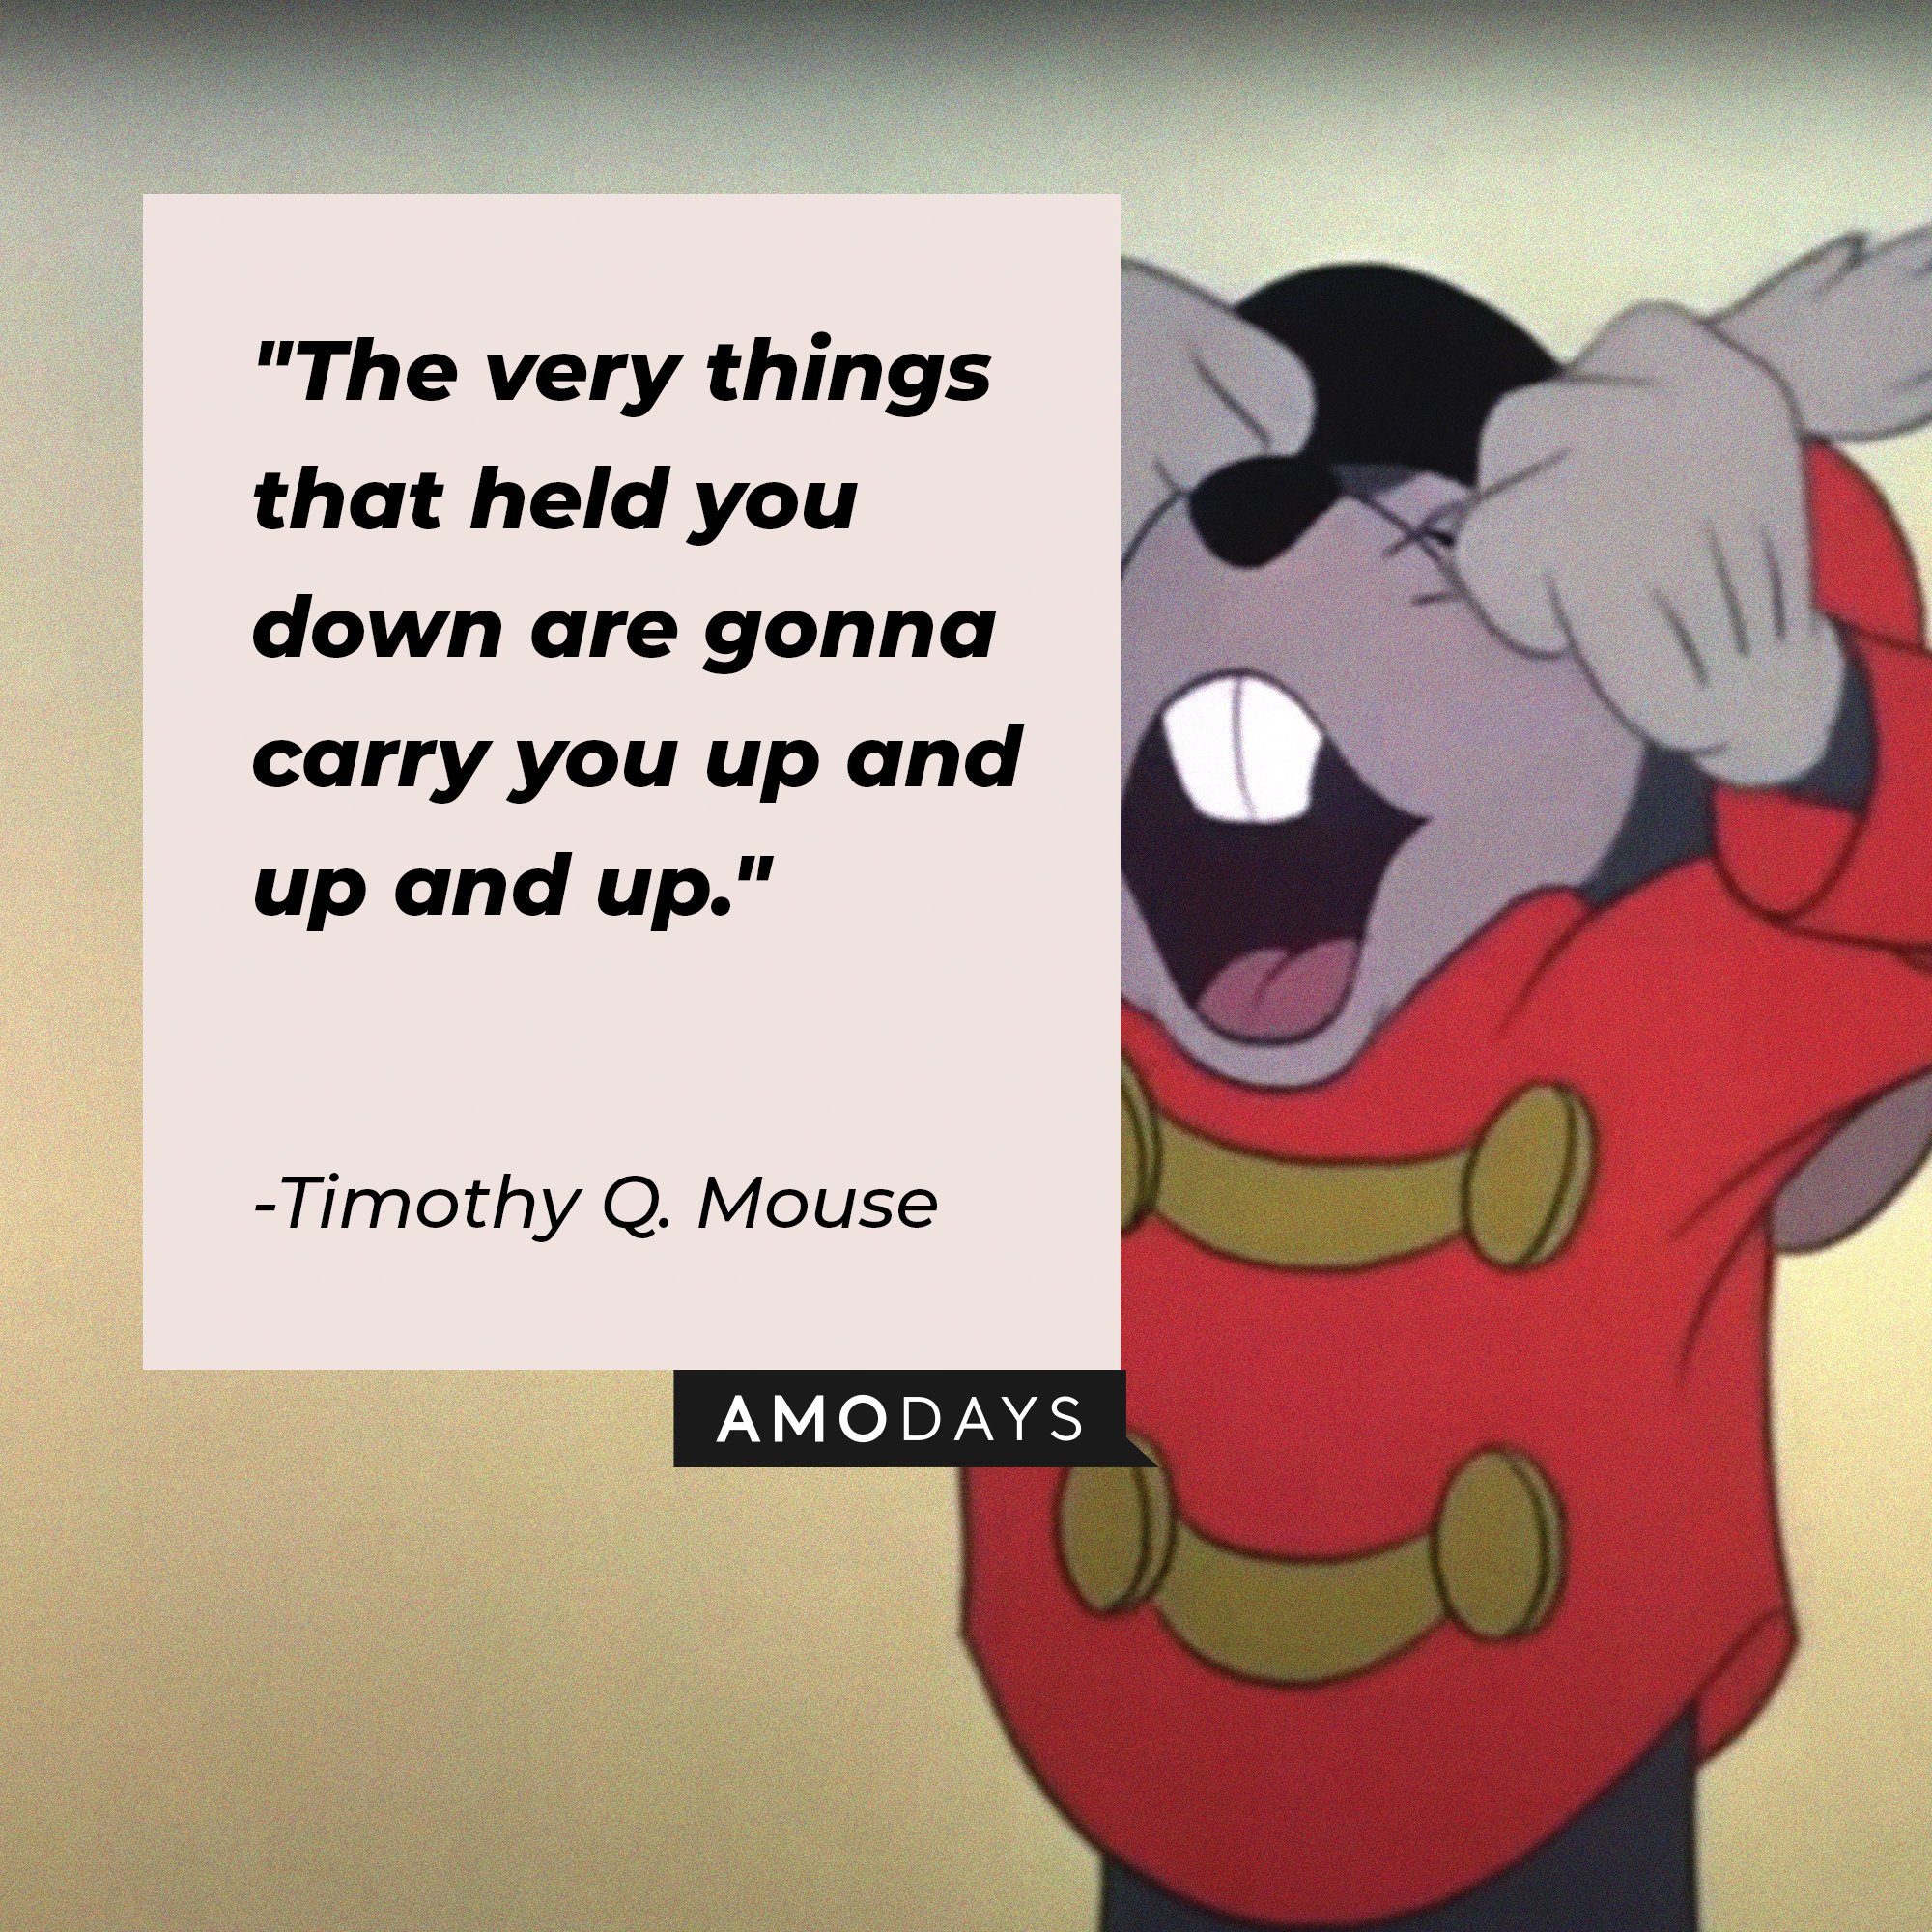 Timothy Q. Mouse’s quote: "The very things that held you down are gonna carry you up and up and up." | Image: AmoDay